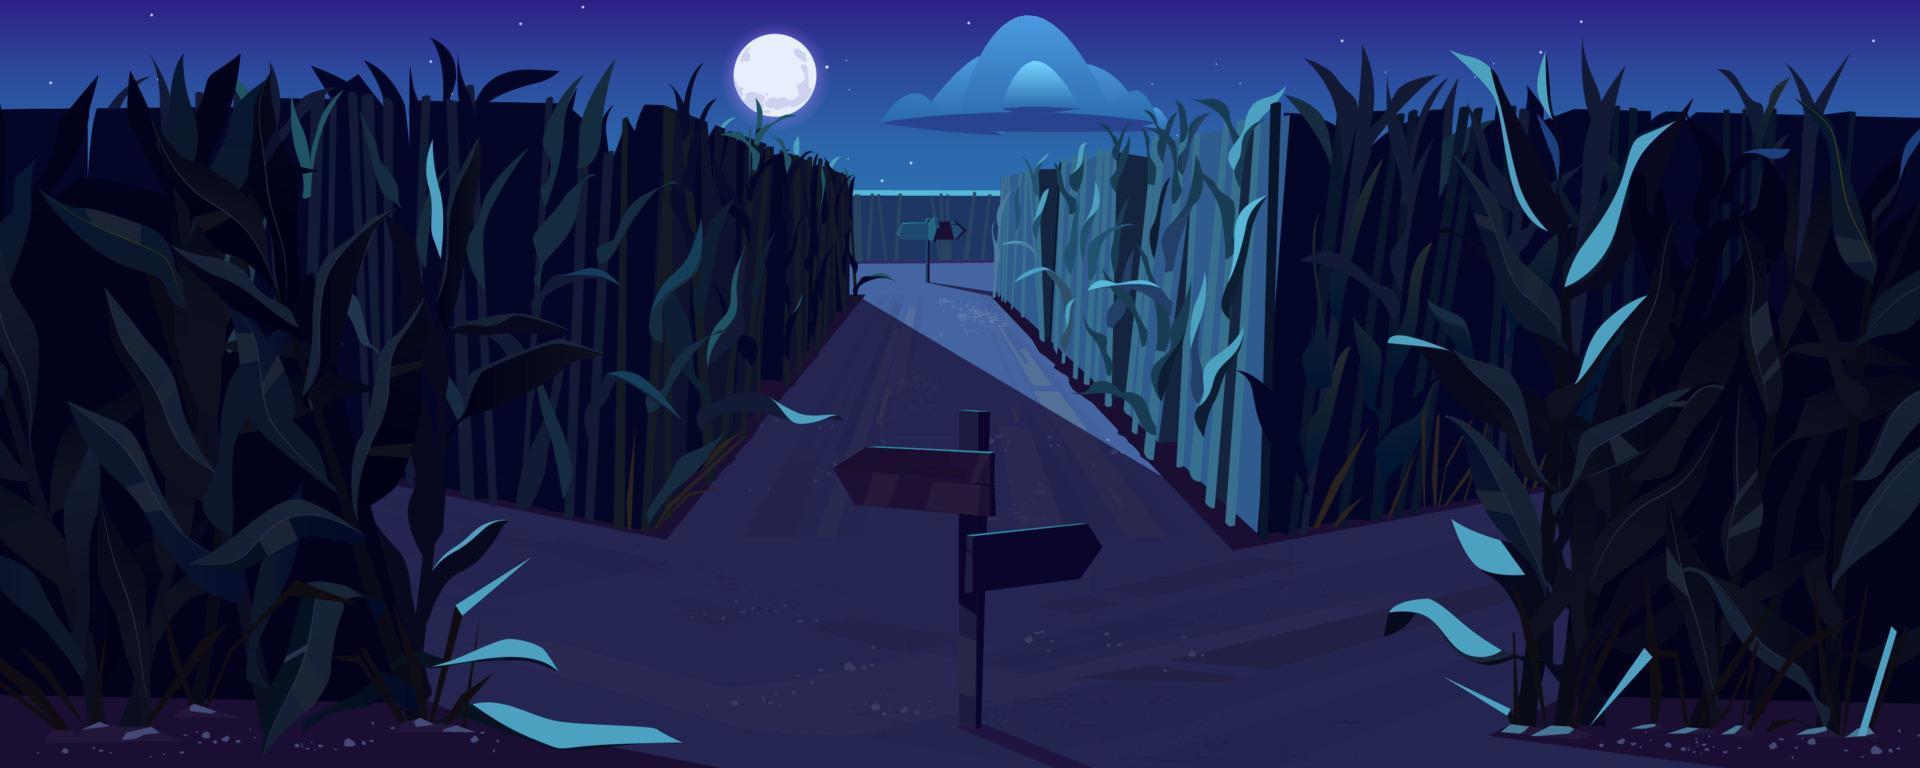 Road on cornfield with fork at night vector